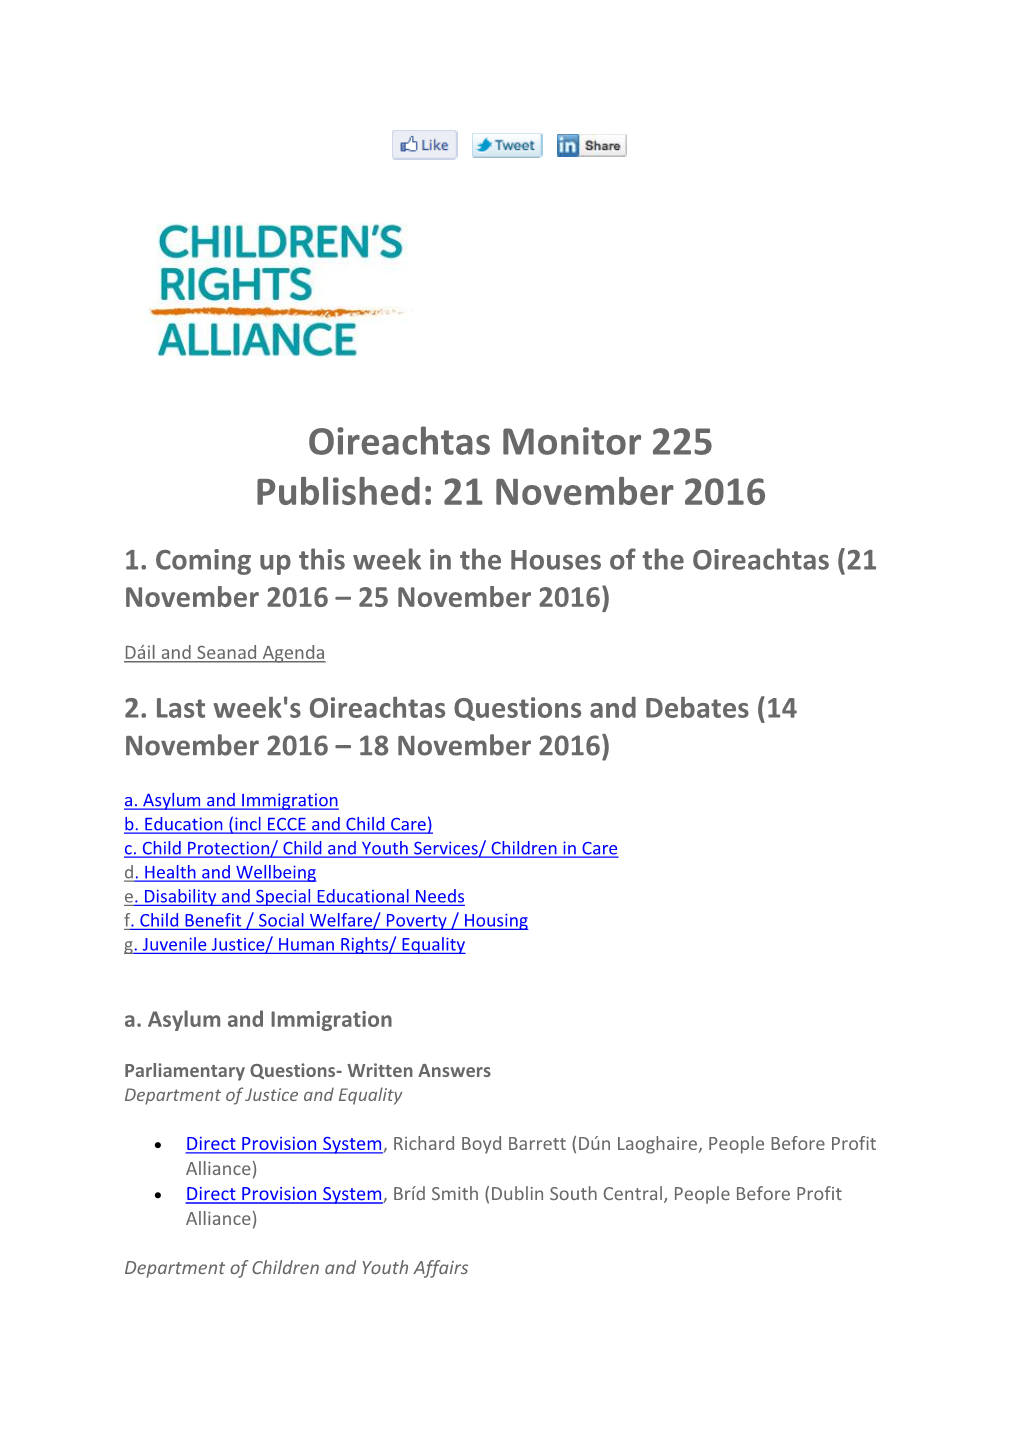 Oireachtas Monitor 225 Published: 21 November 2016